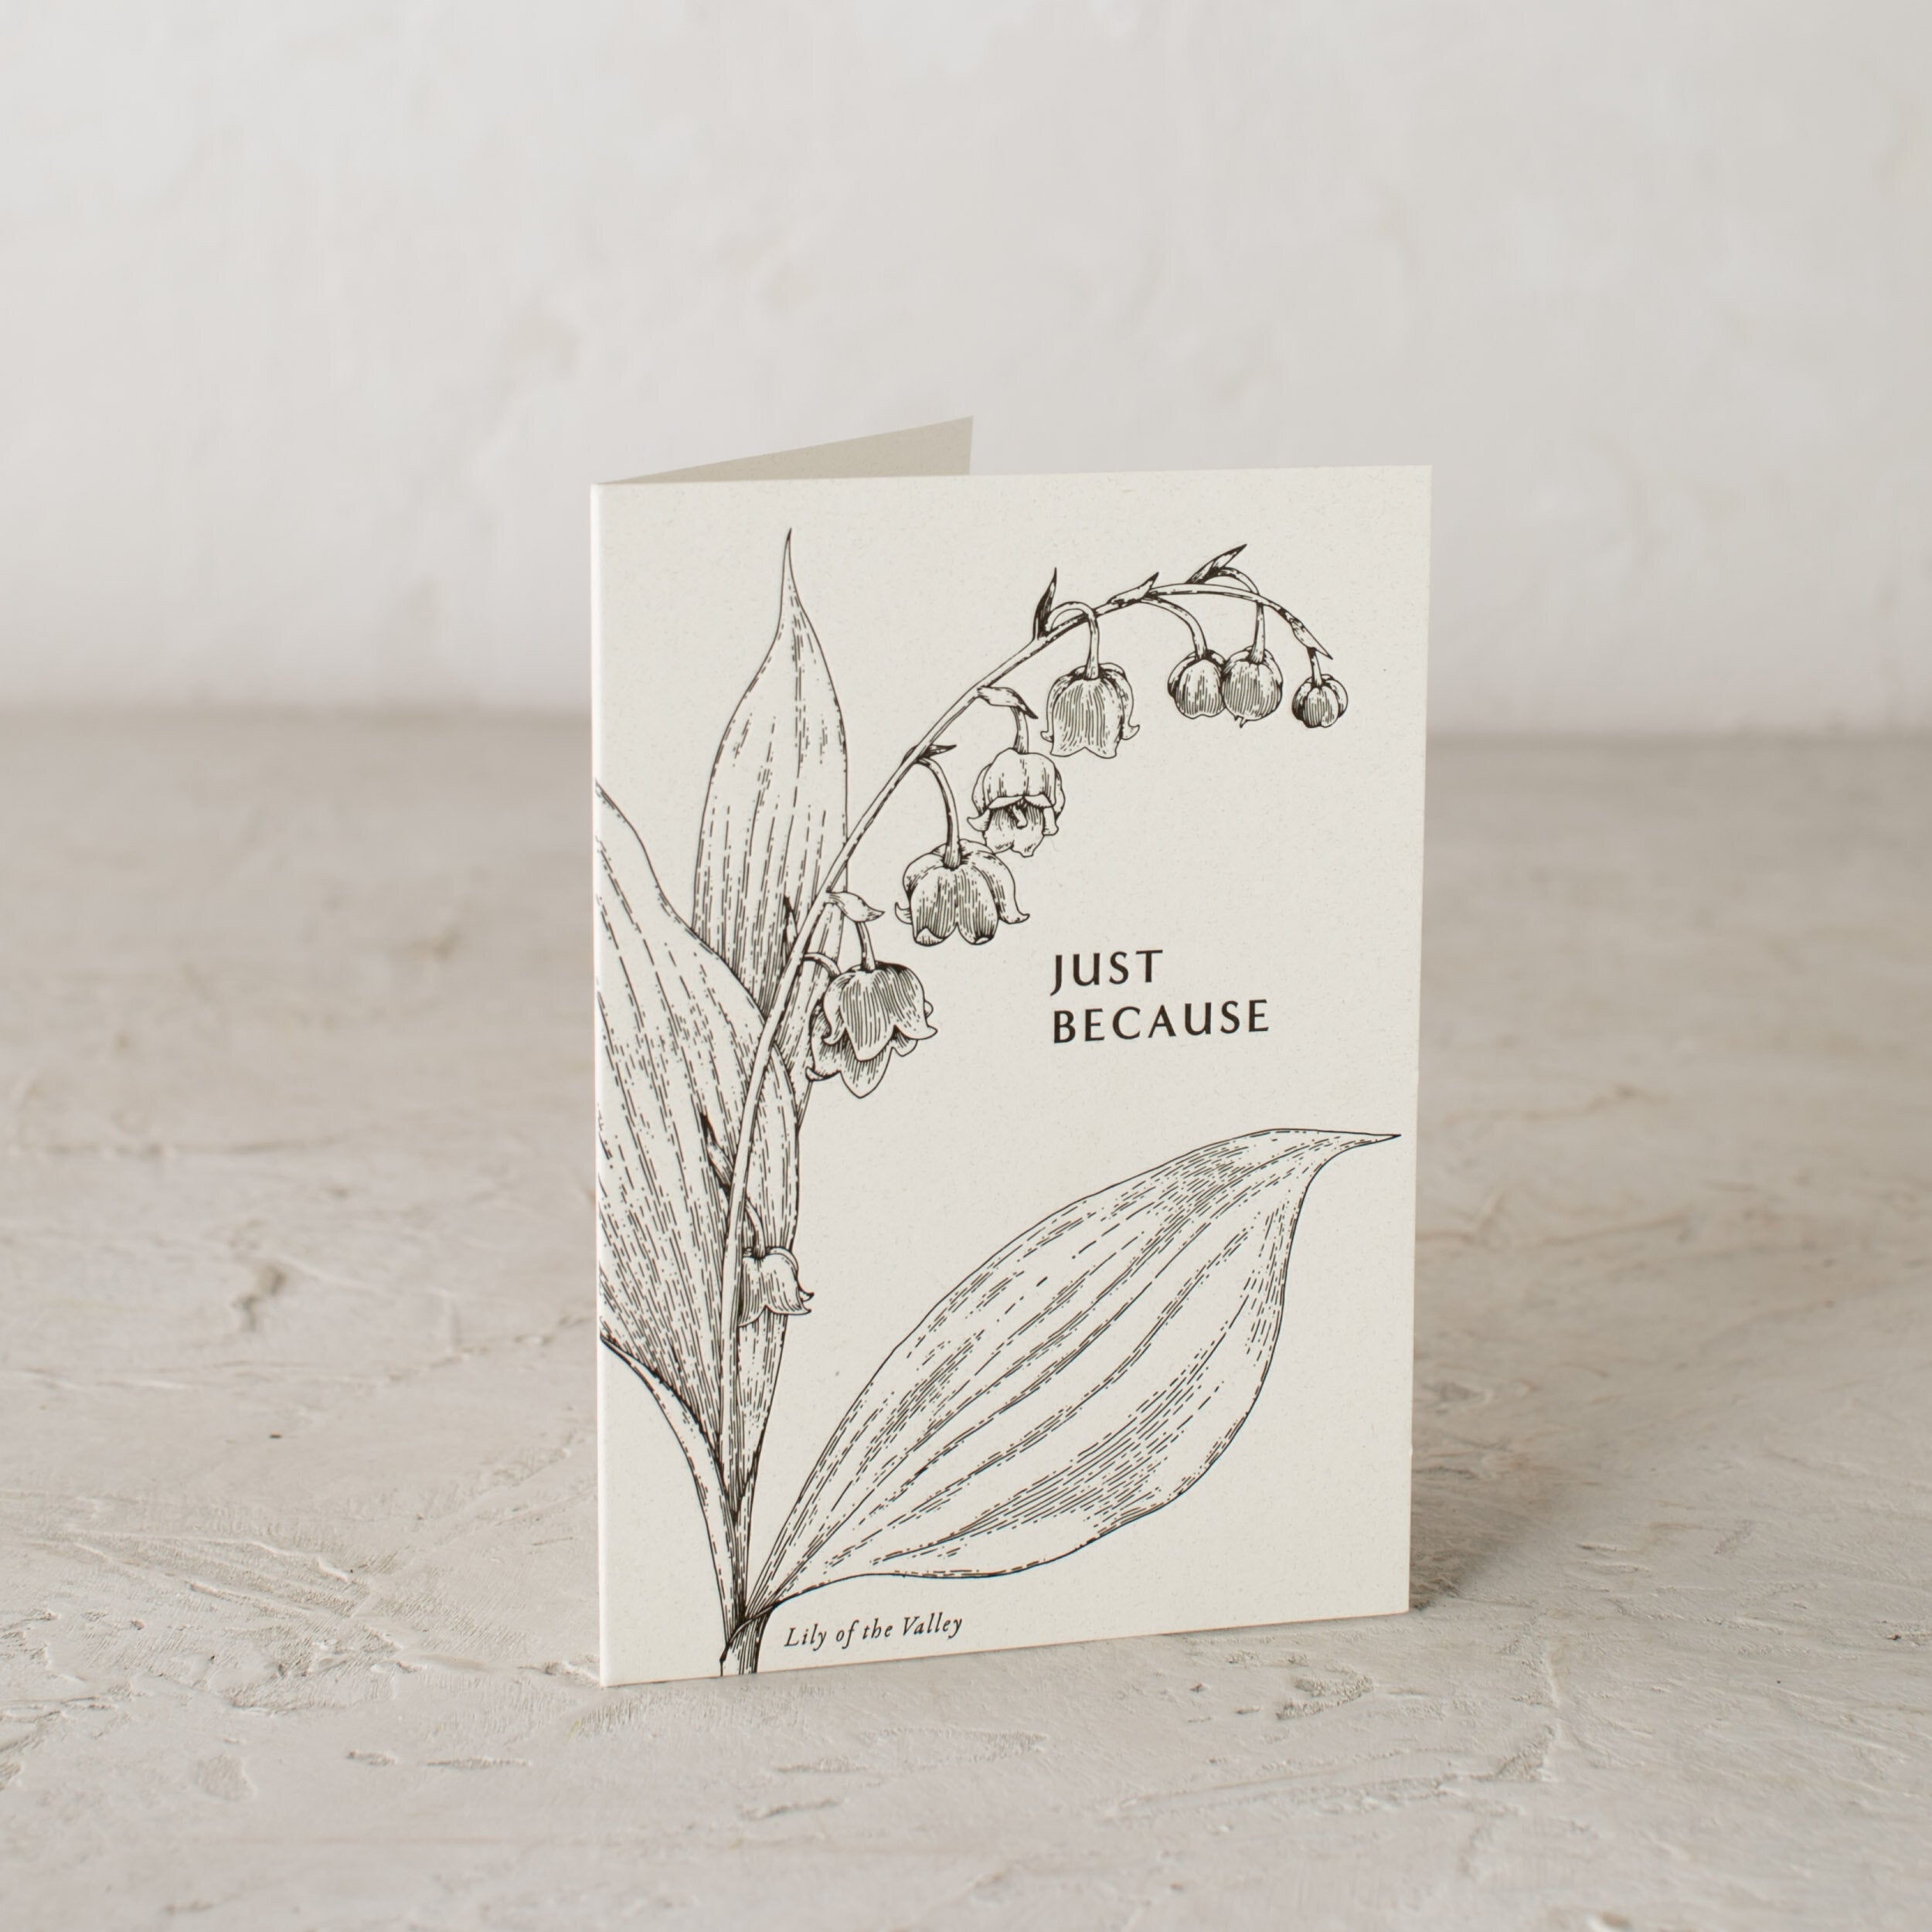 Letter-pressed greeting card with botanical illustration of a Lily of the valley. Text reads "Just Because". Designed and sold by Shop Verdant, Kansas City gift store.